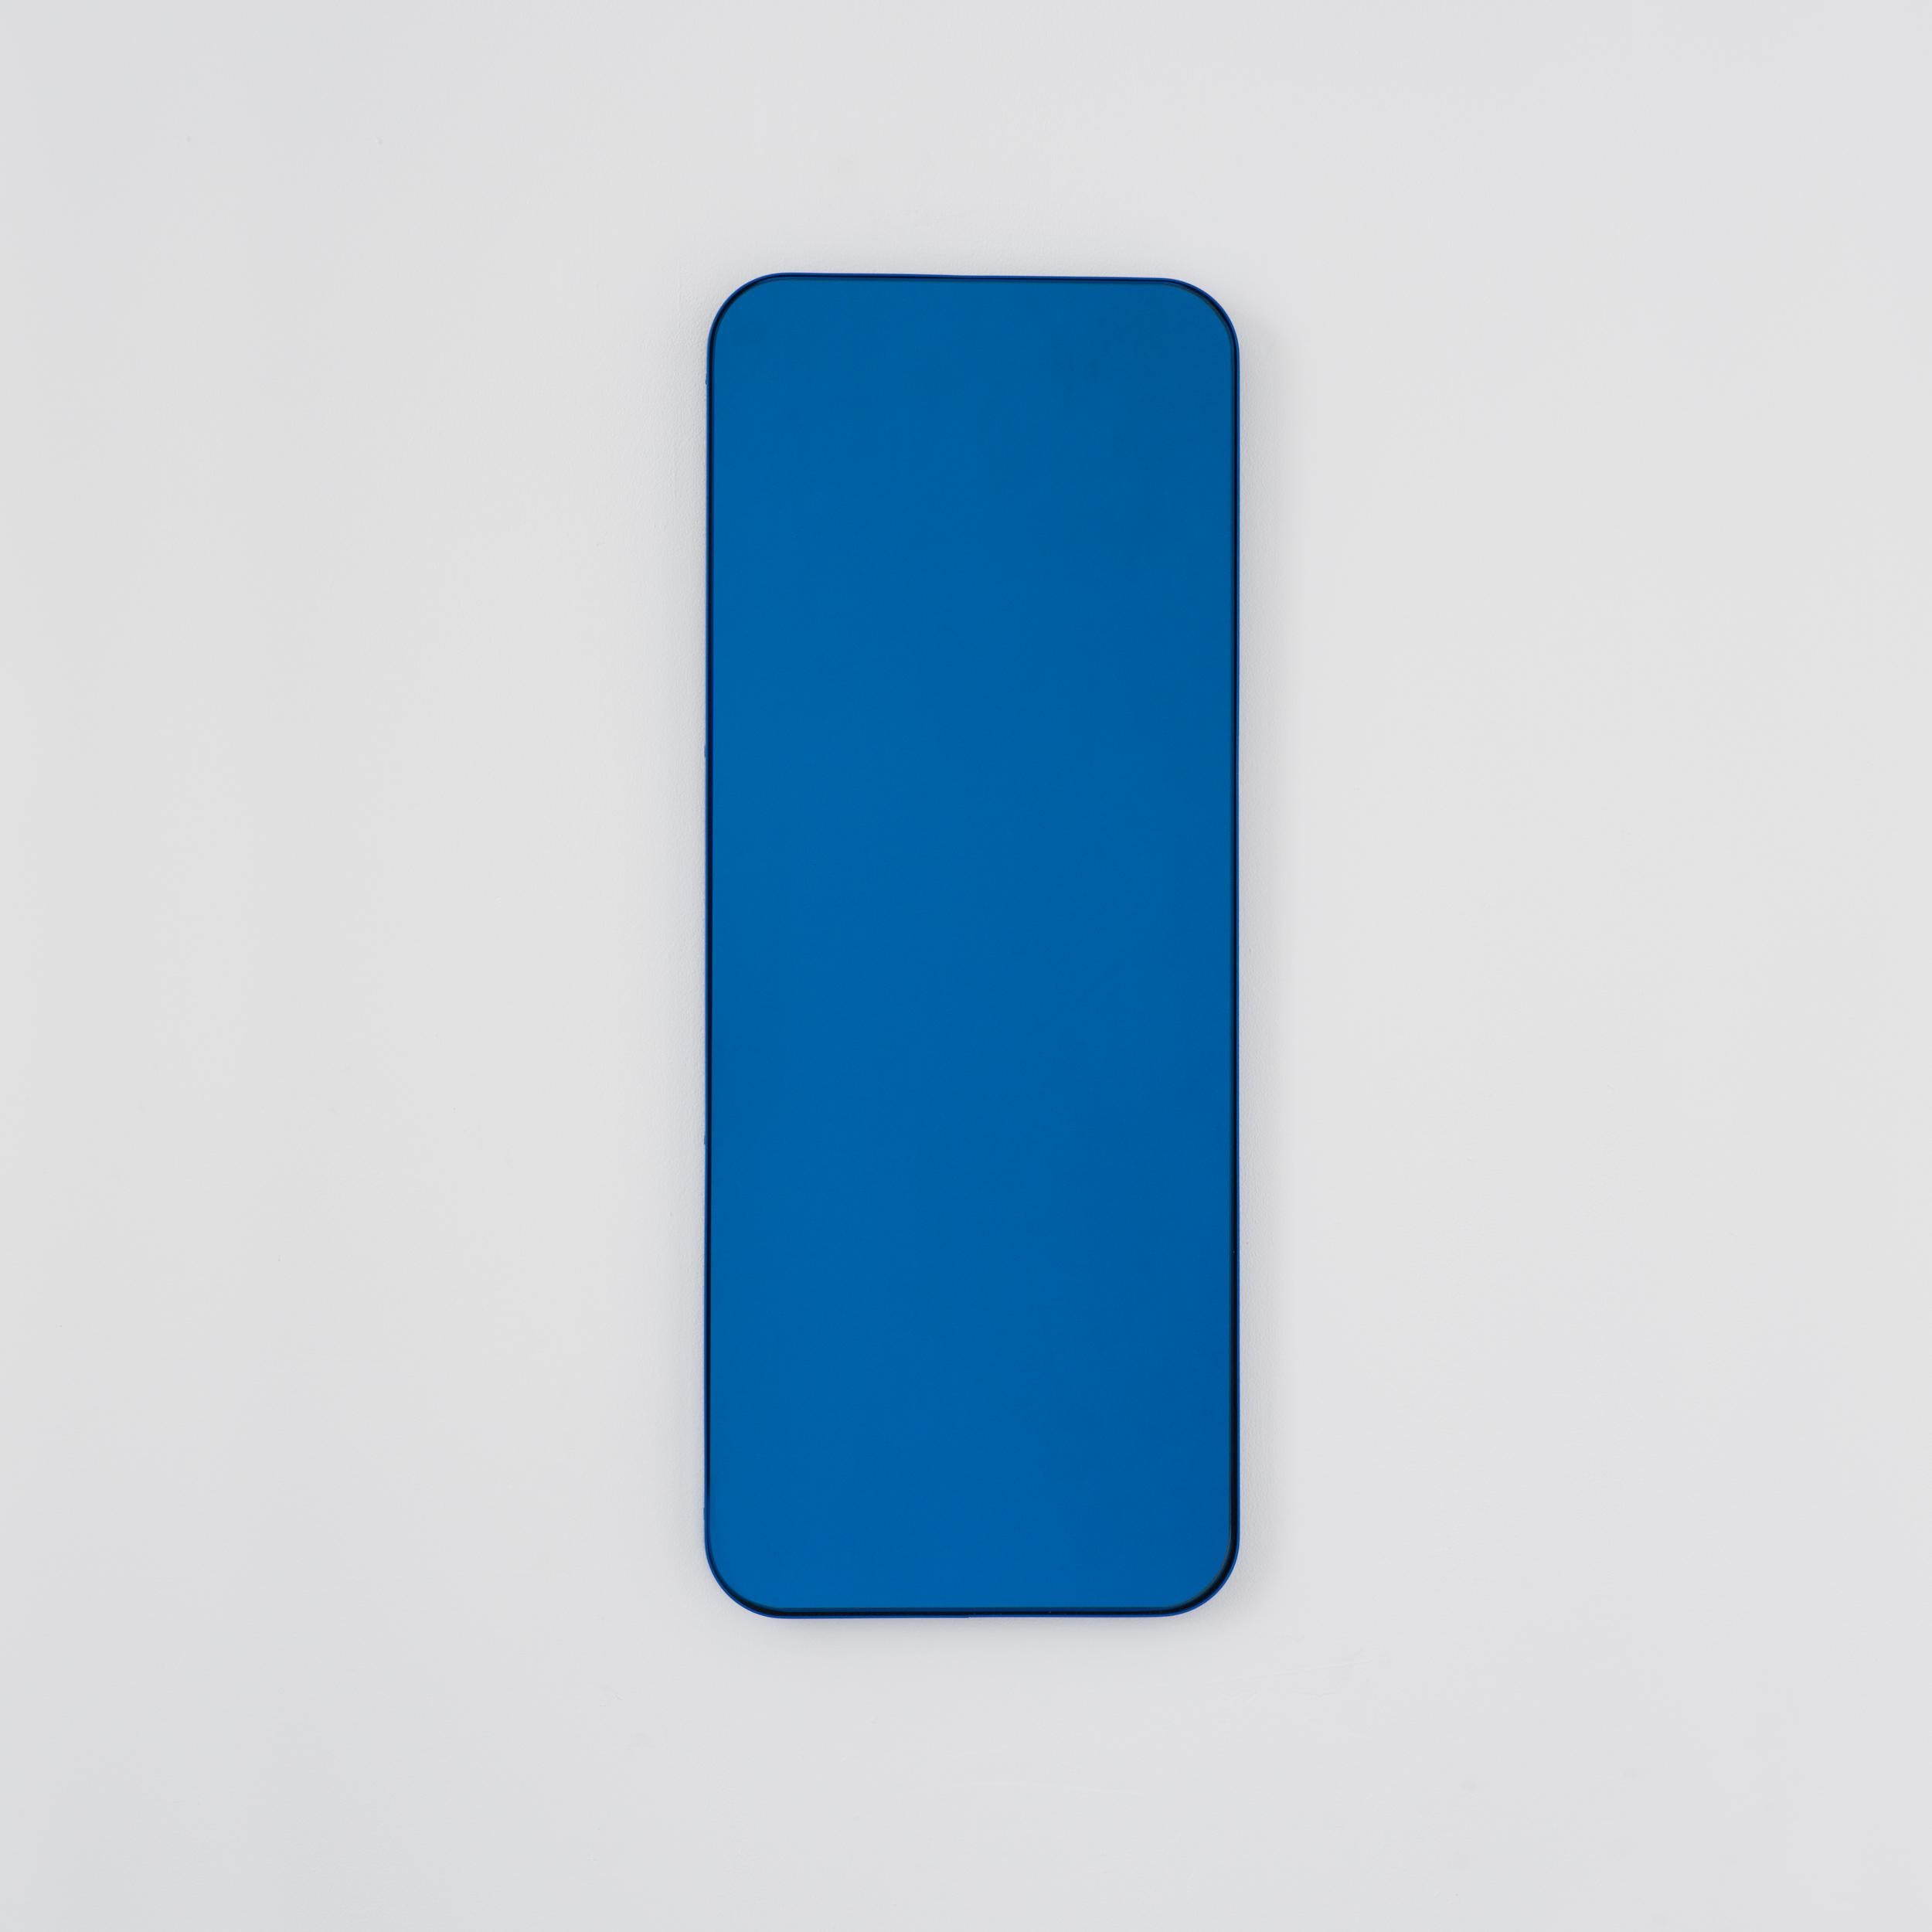 Quadris Rectangular Contemporary Blue Tinted Mirror with a Blue Frame, Large In New Condition For Sale In London, GB